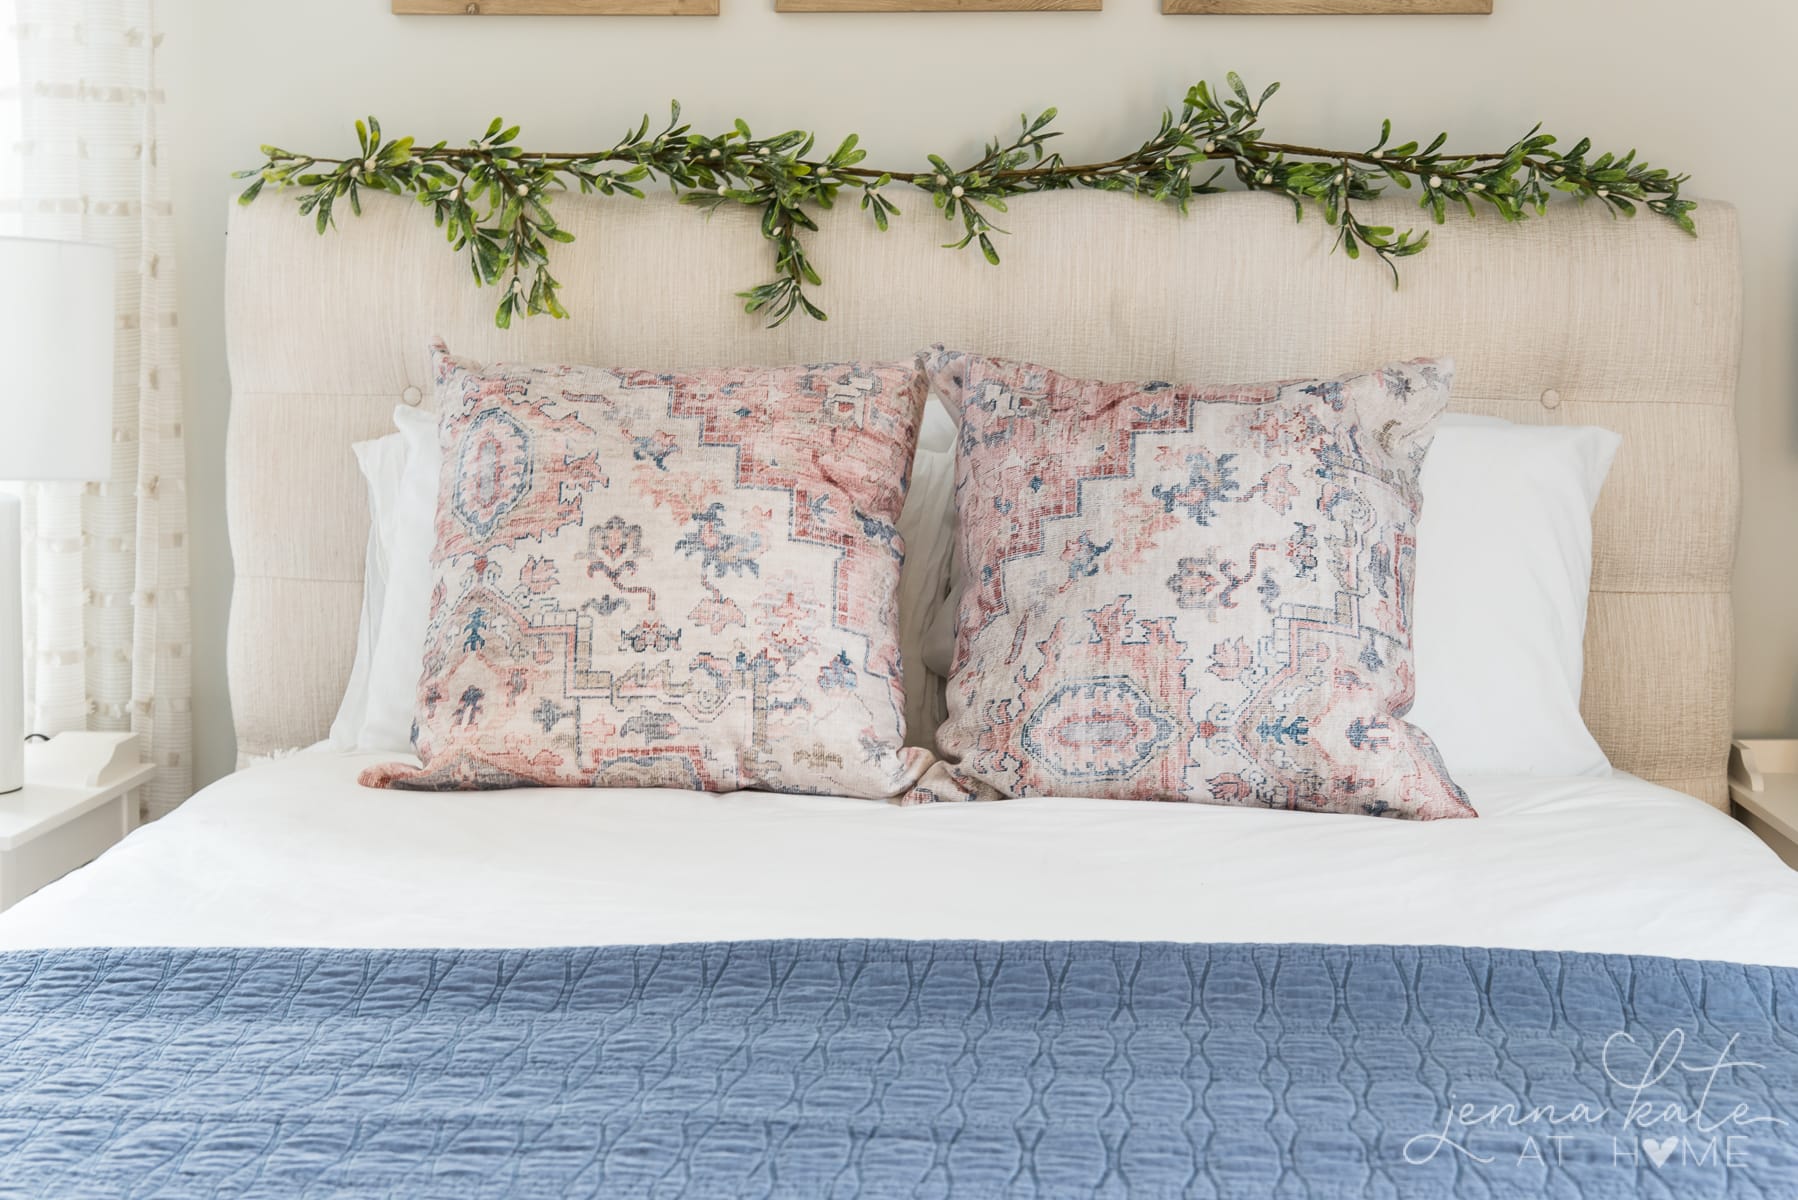 Be with white sheets and touches of blue and pink decor